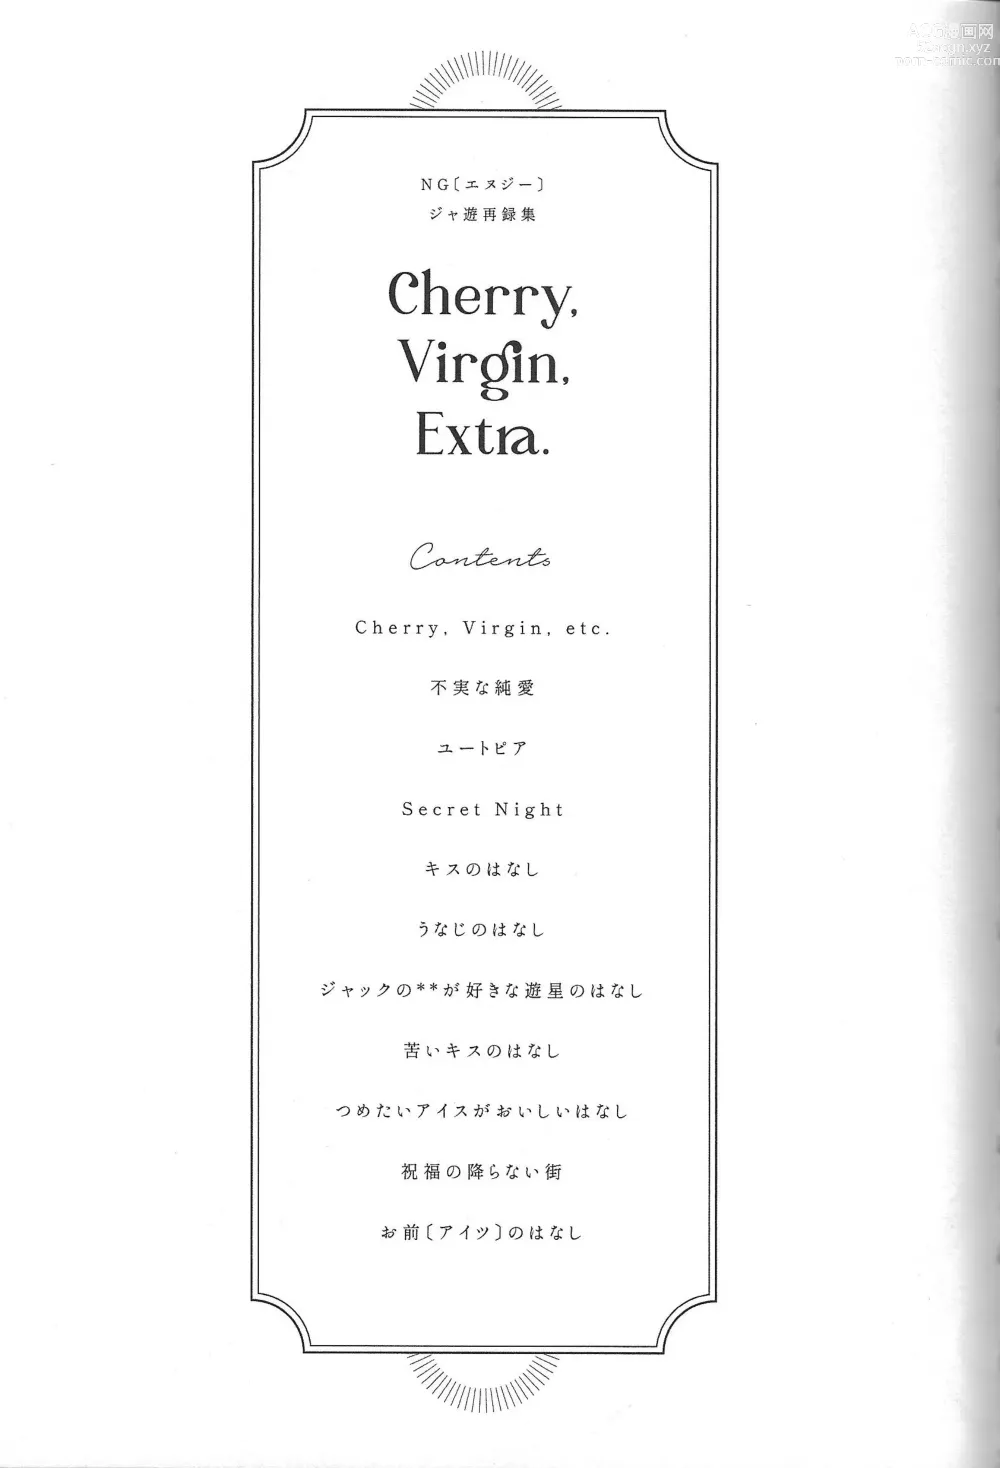 Page 2 of doujinshi Cherry, Virgin, Extra.